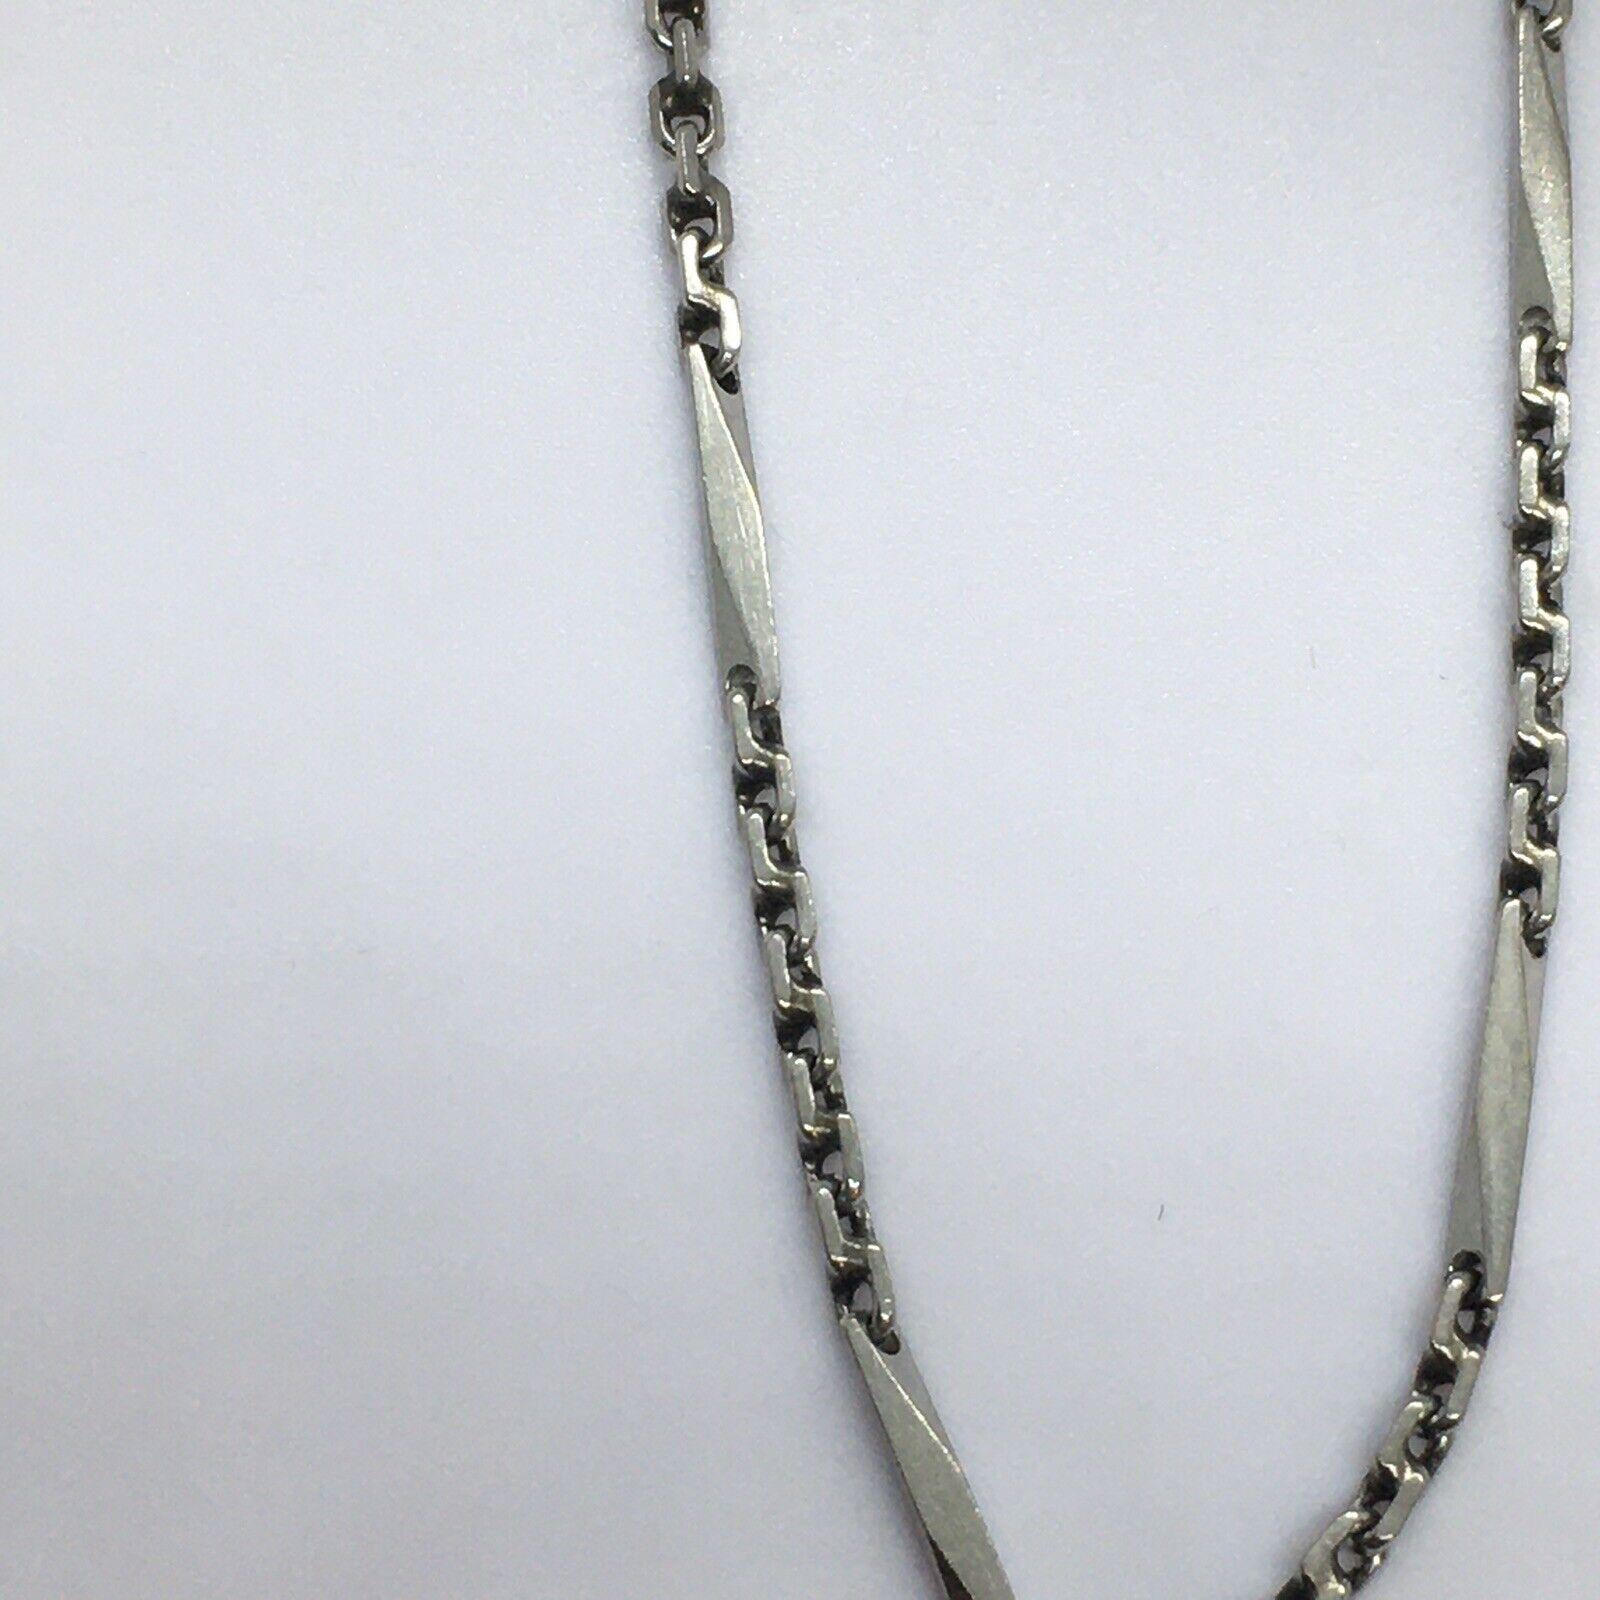 Art Deco Platinum Handmade Necklace Chain 18.8 Gram 1920s Possibly Japan In Good Condition For Sale In Santa Monica, CA